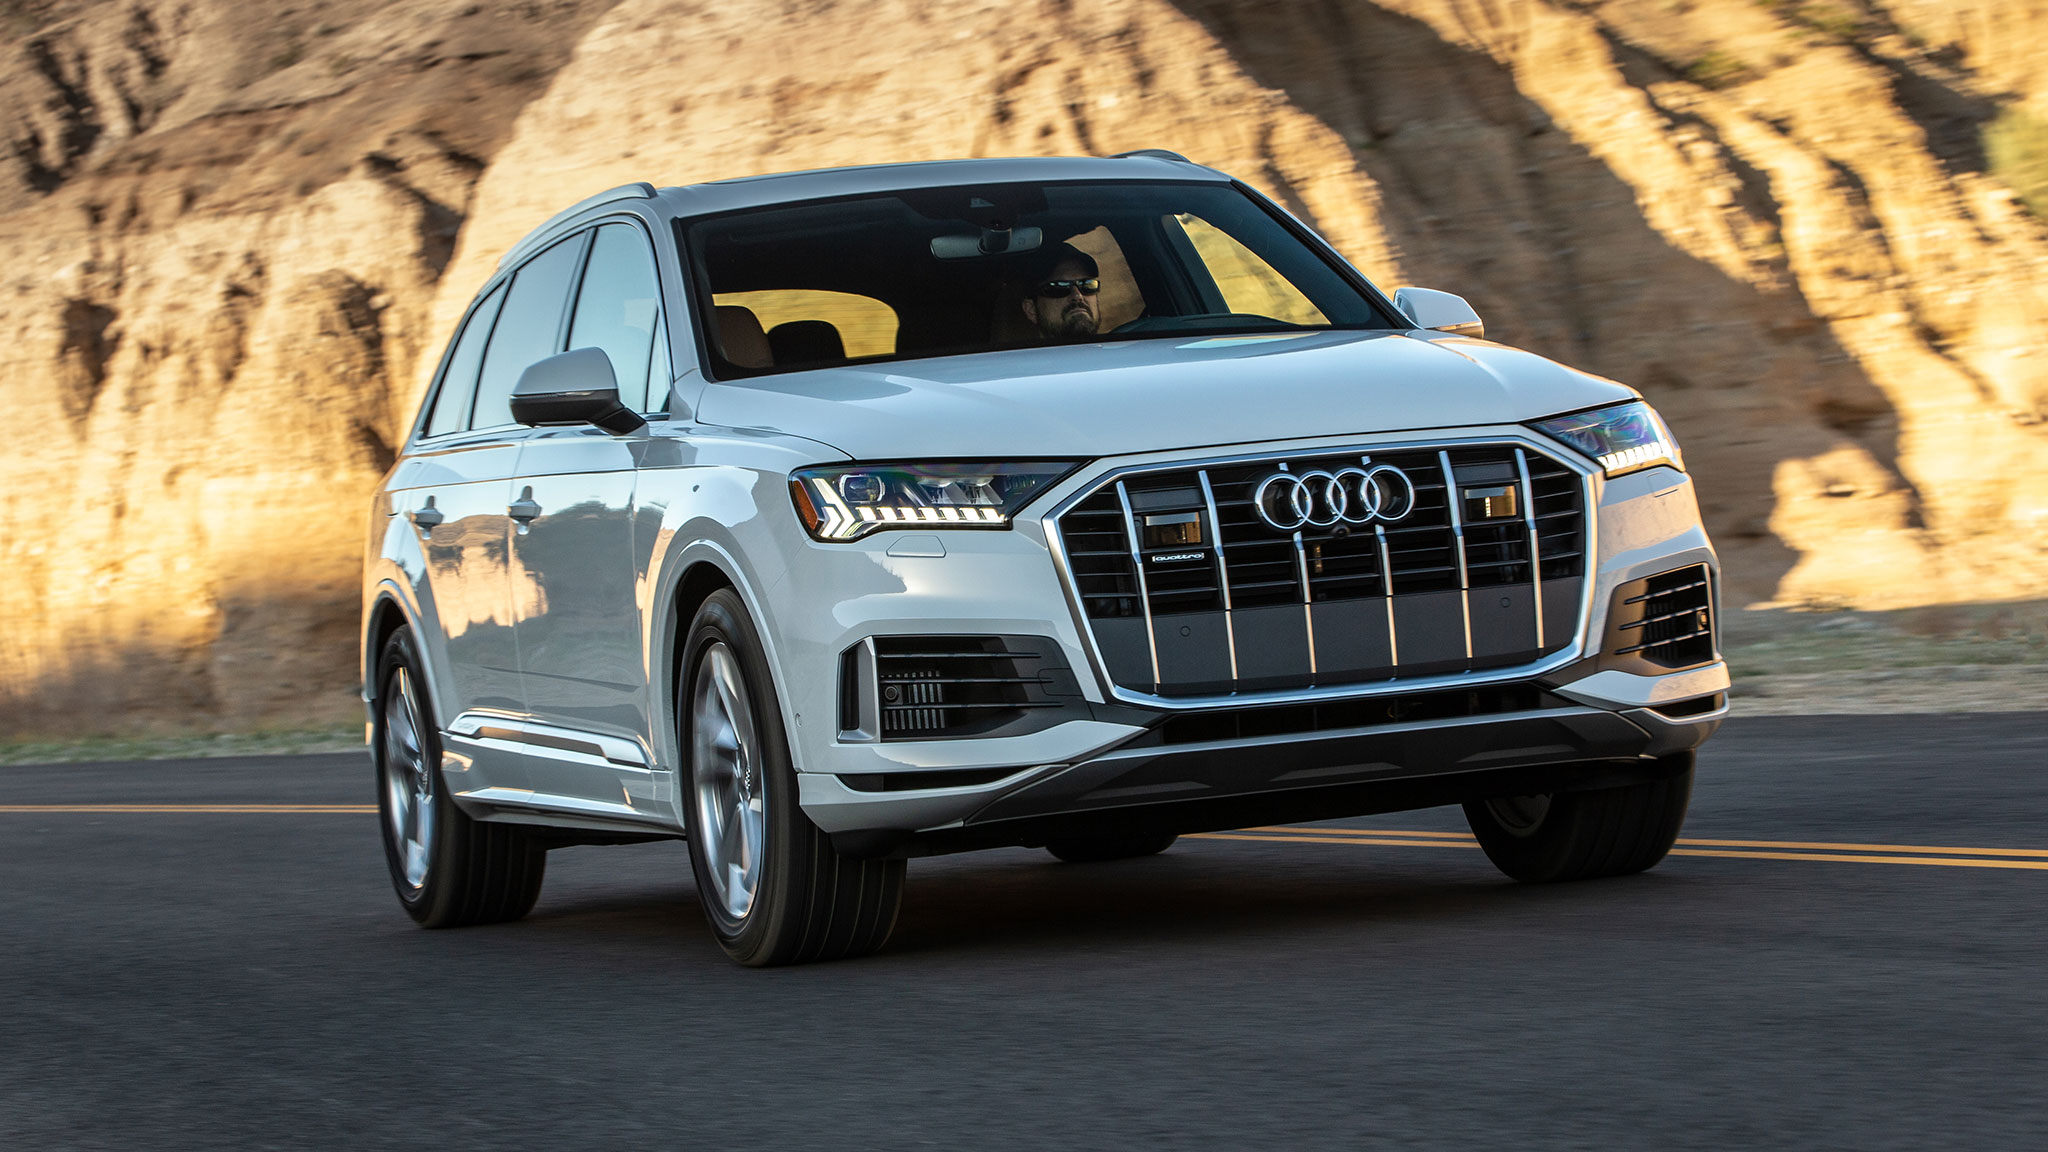 Audi Q7 For Hire In UAE 